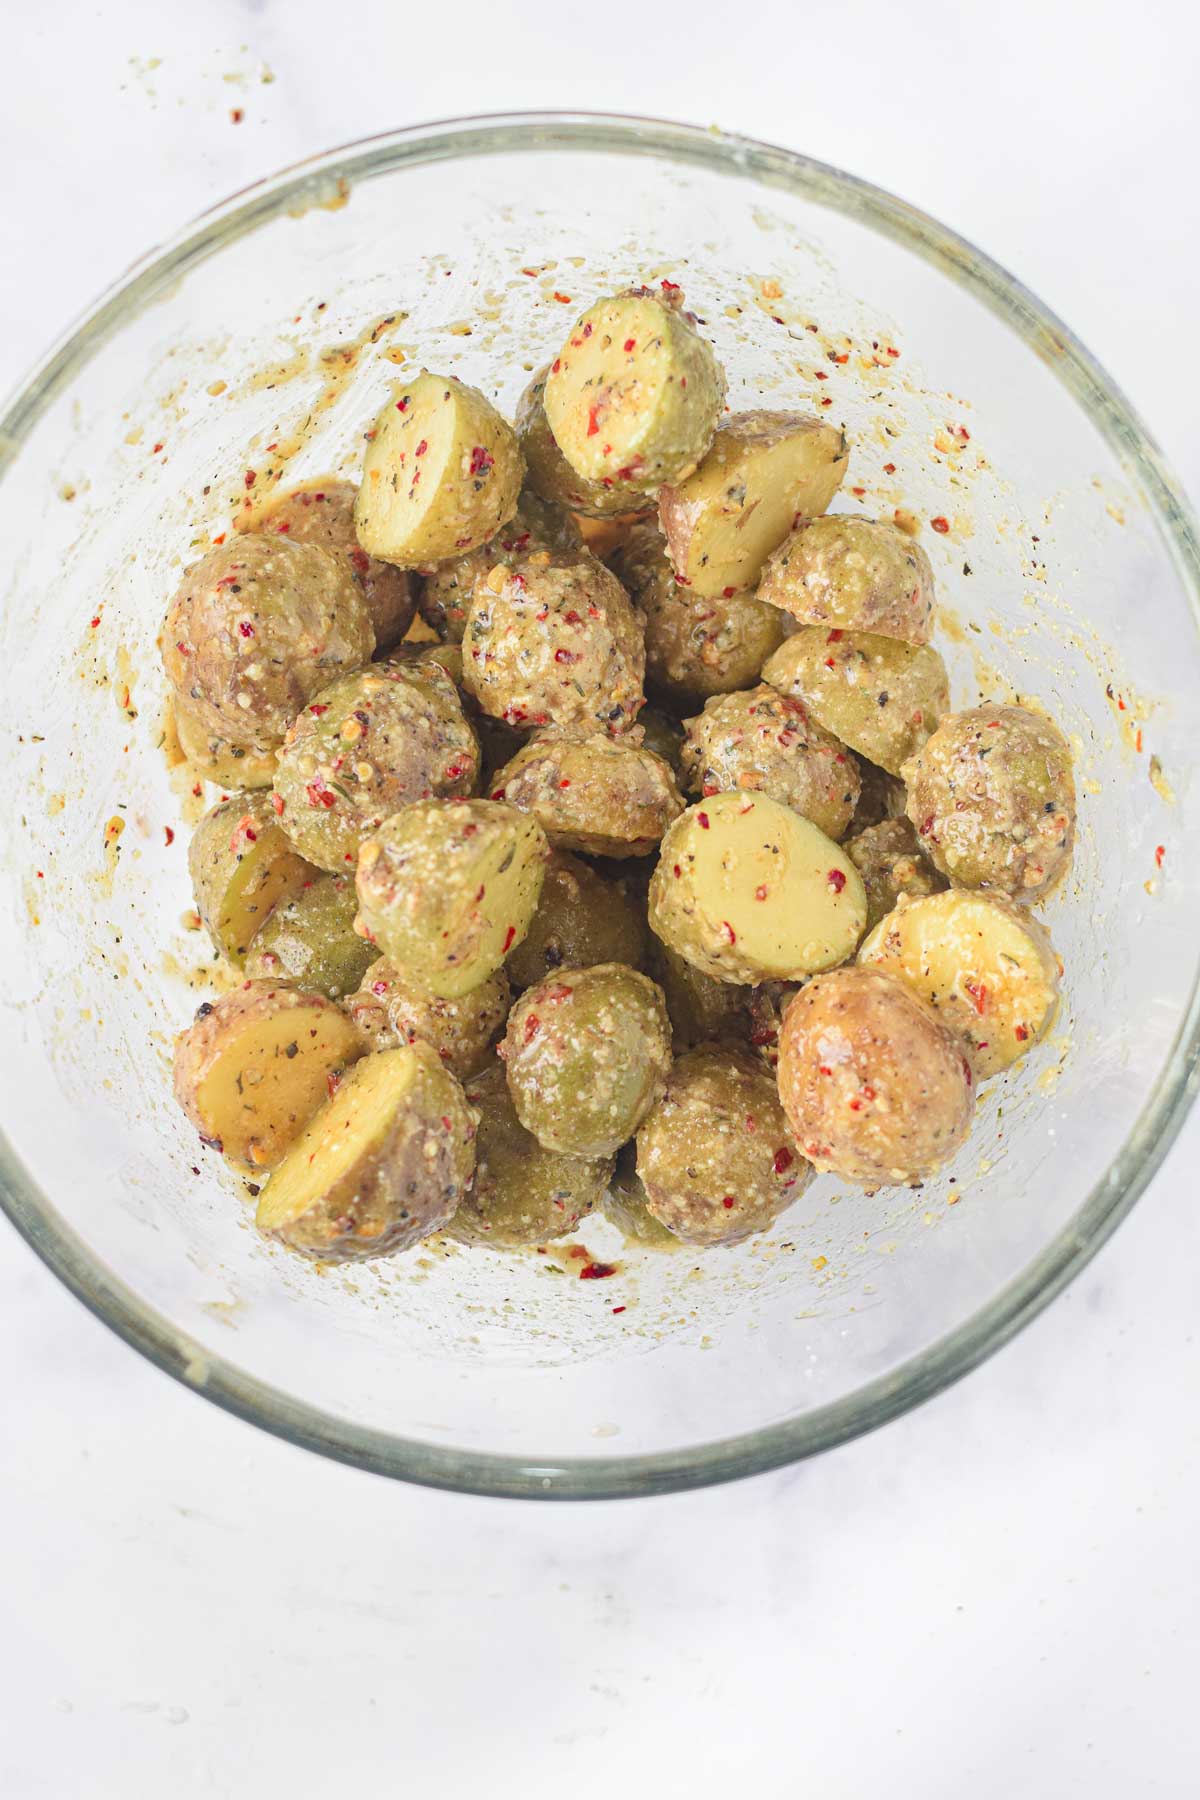 Coating the Air Fryer Parmesan Potatoes with spices in a bowl